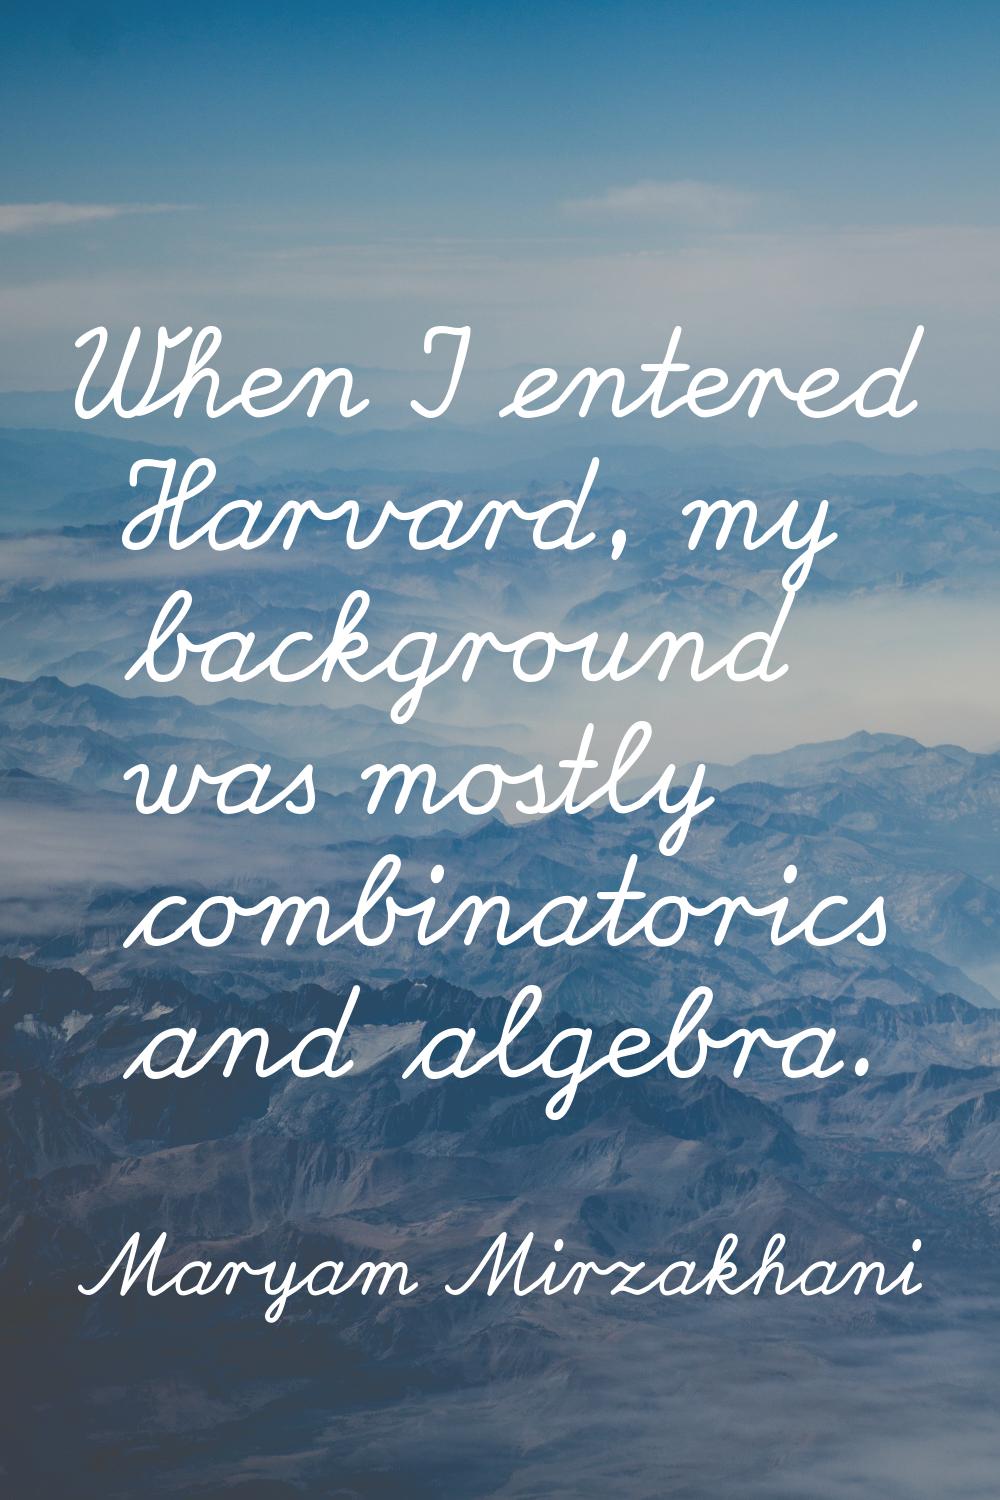 When I entered Harvard, my background was mostly combinatorics and algebra.